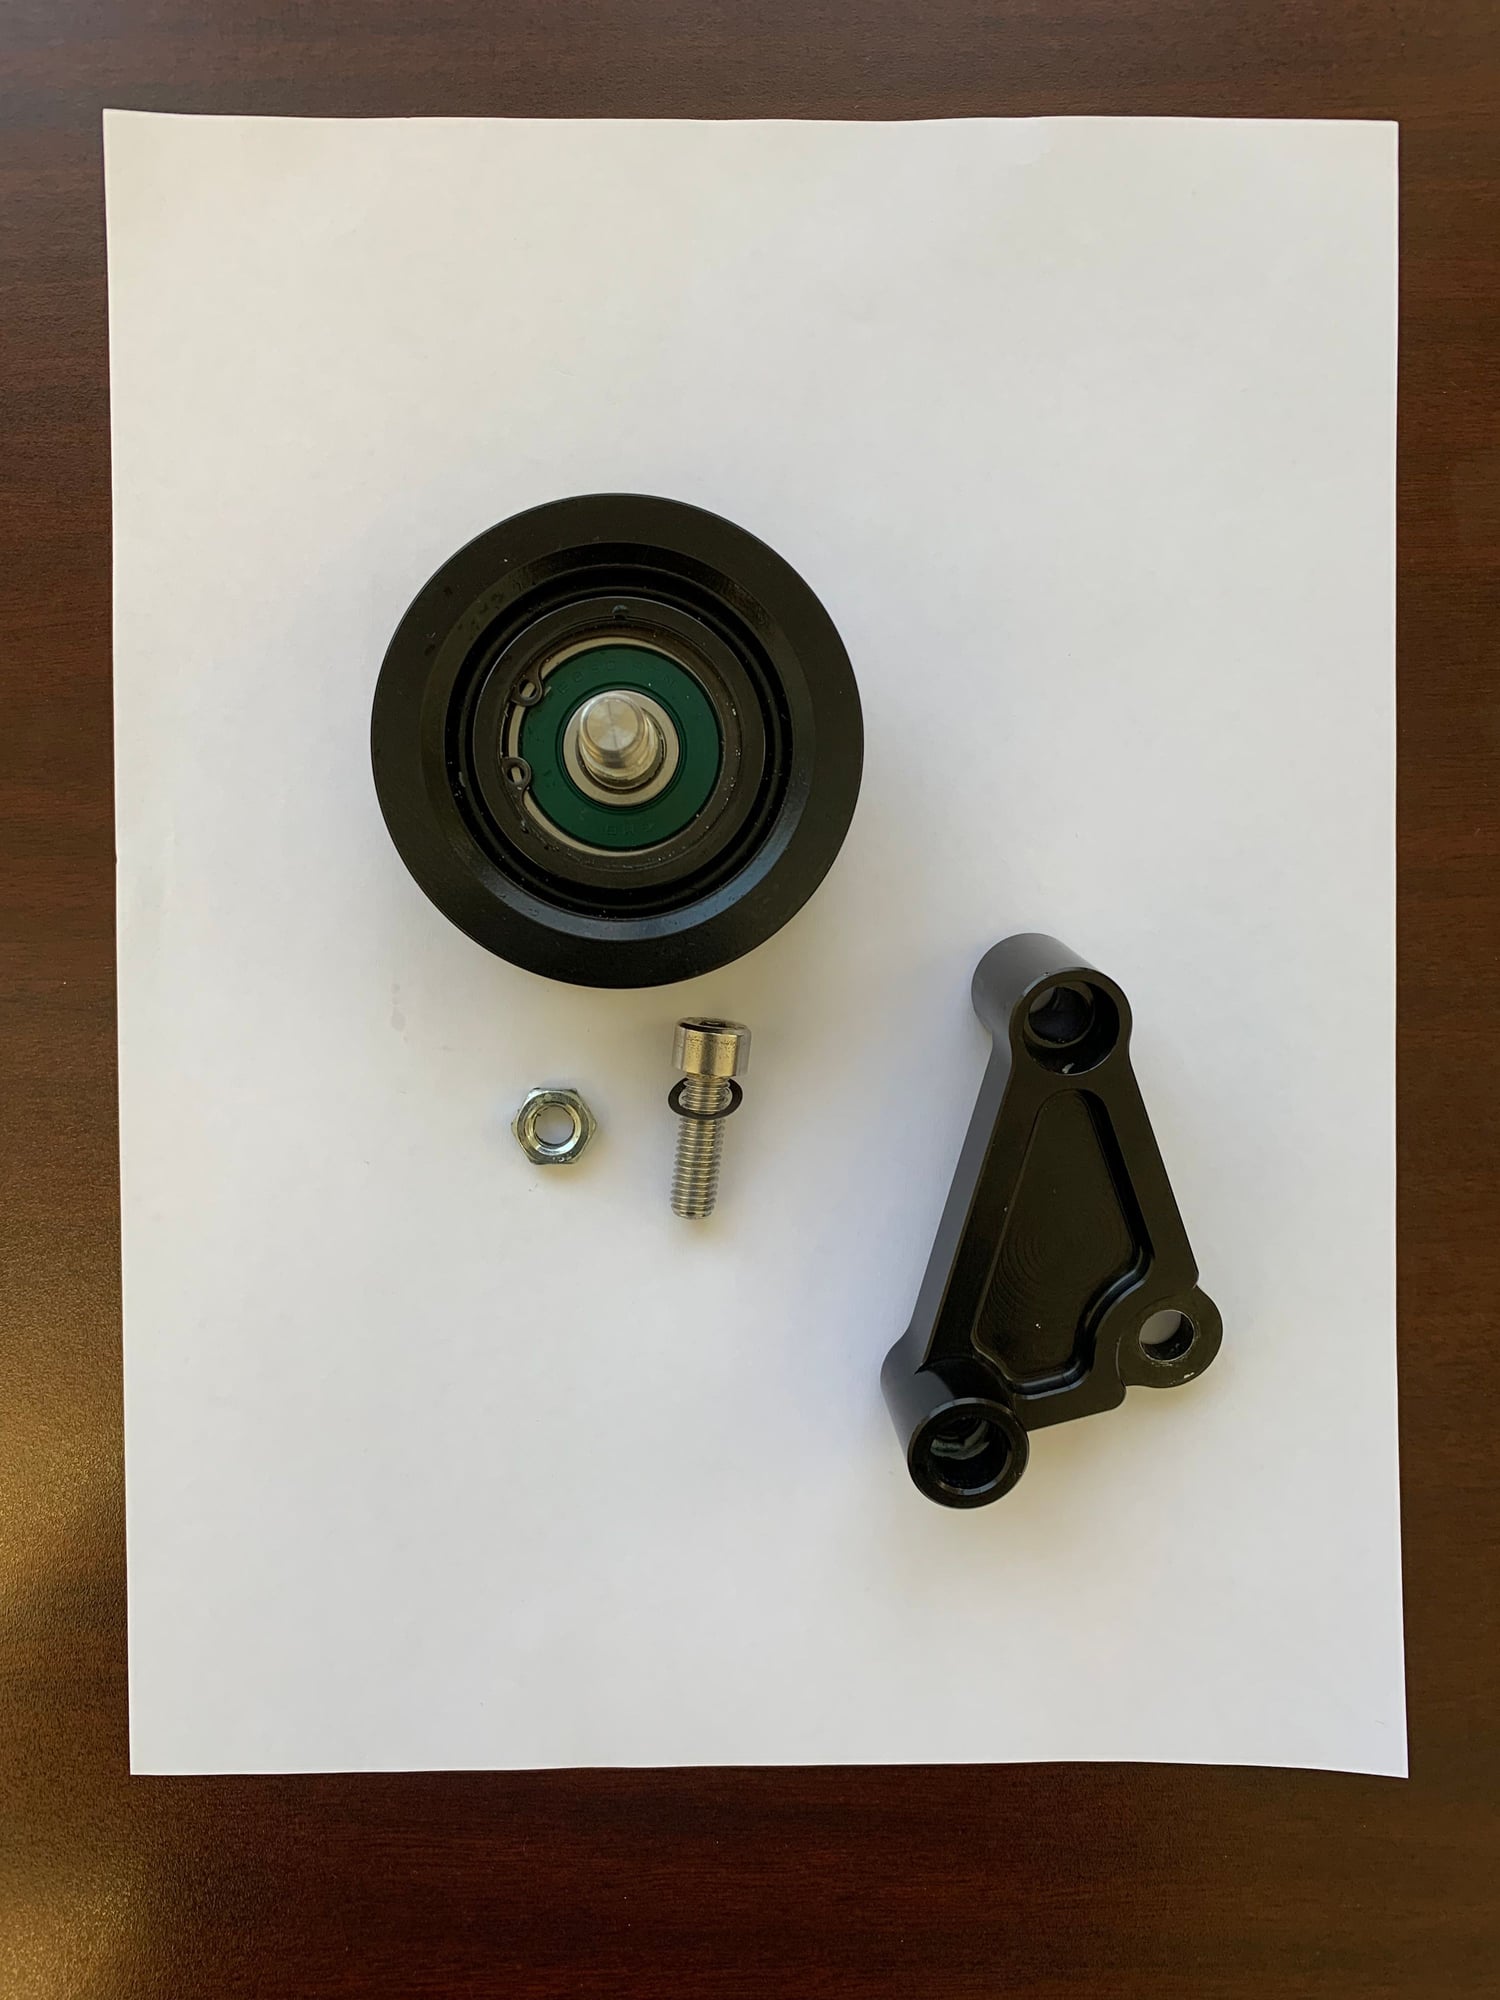 Engine - Intake/Fuel - FFE Idler Pulley, FFE DBW Throttle Body Adapter - New - 1993 to 2000 Mazda RX-7 - Allentown, PA 18031, United States